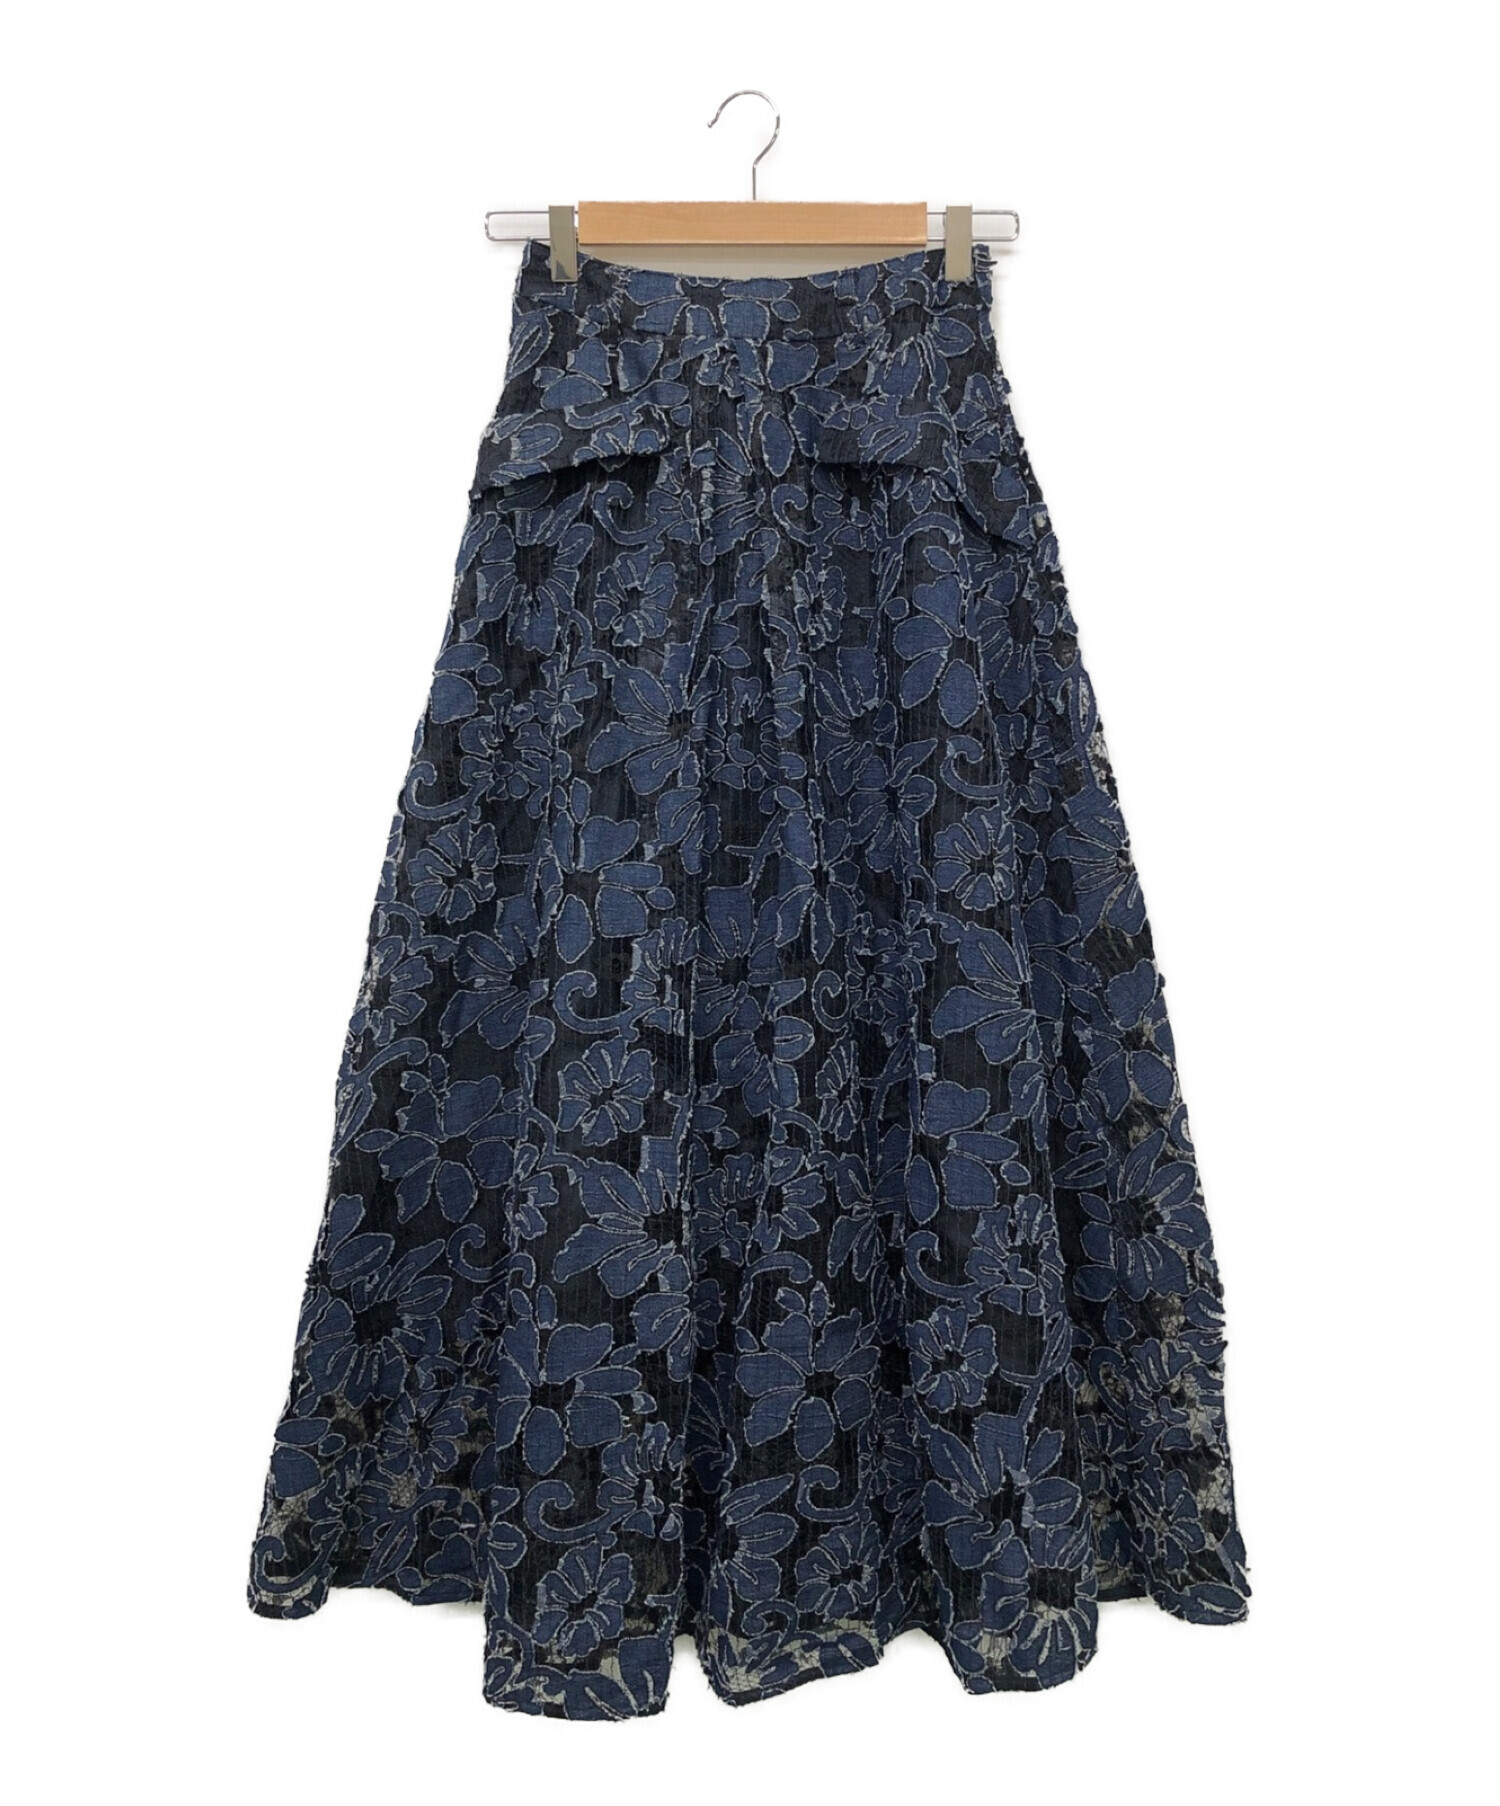 ANTHESIS LACE SKIRT